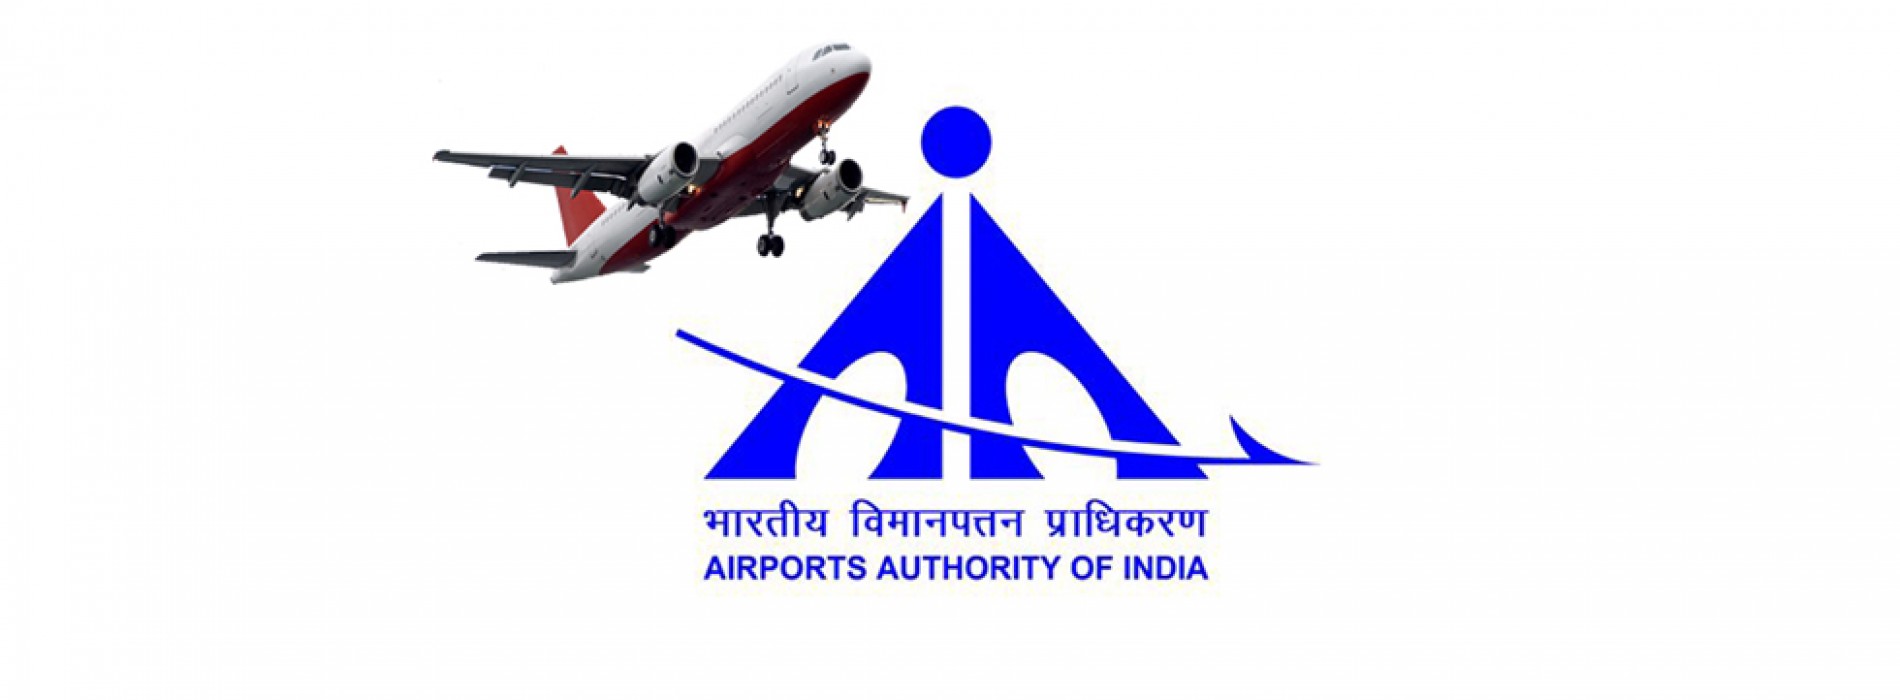 AAI to take up development work at different city airports